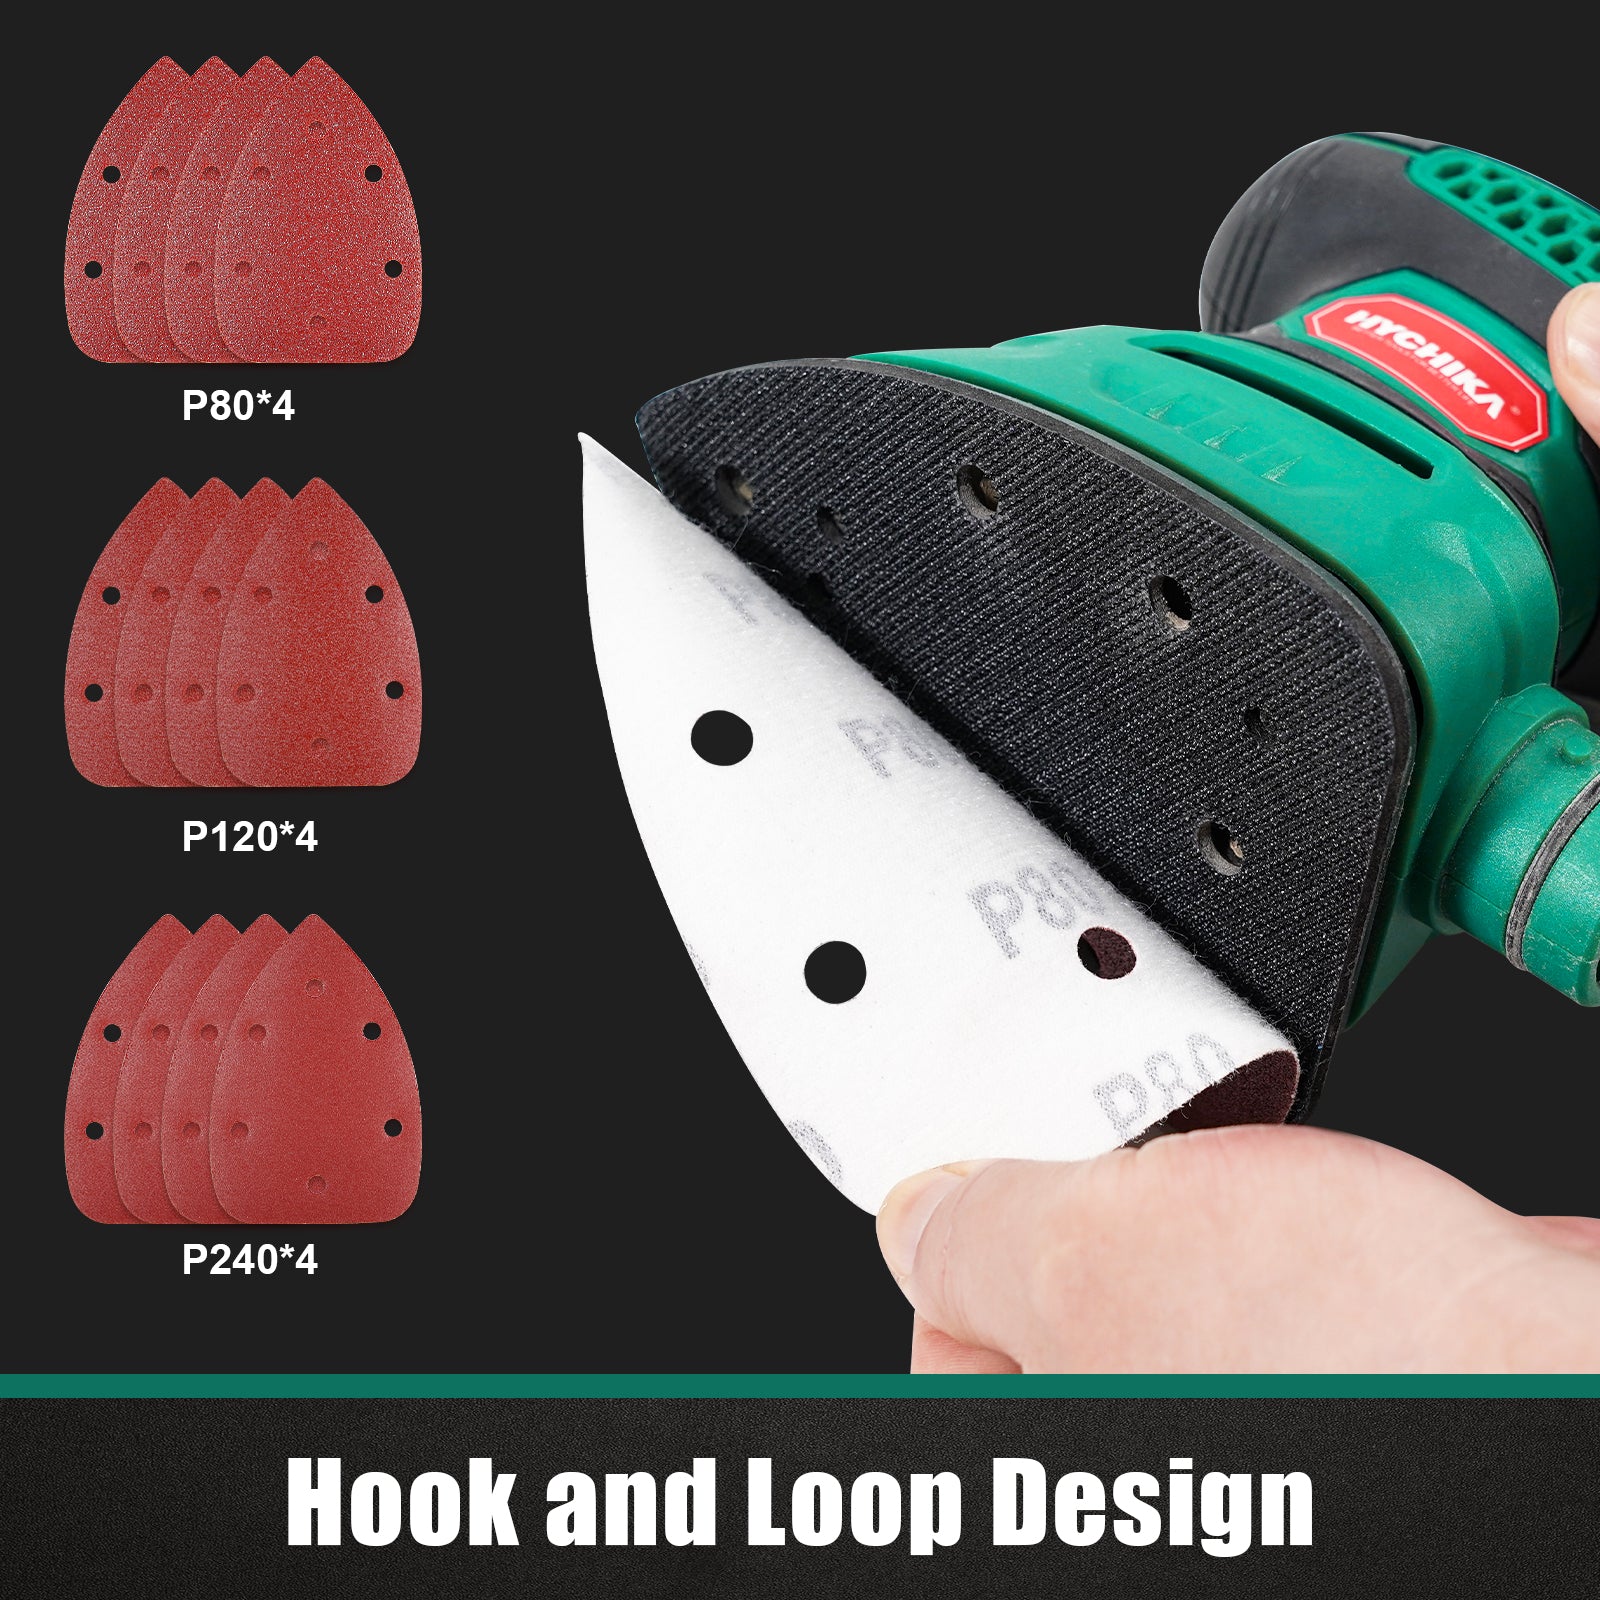 HYCHIKA 140W Detail Sander, 1.2A Palm Sander Tool with 12pcs Sandpapers (EU/US)